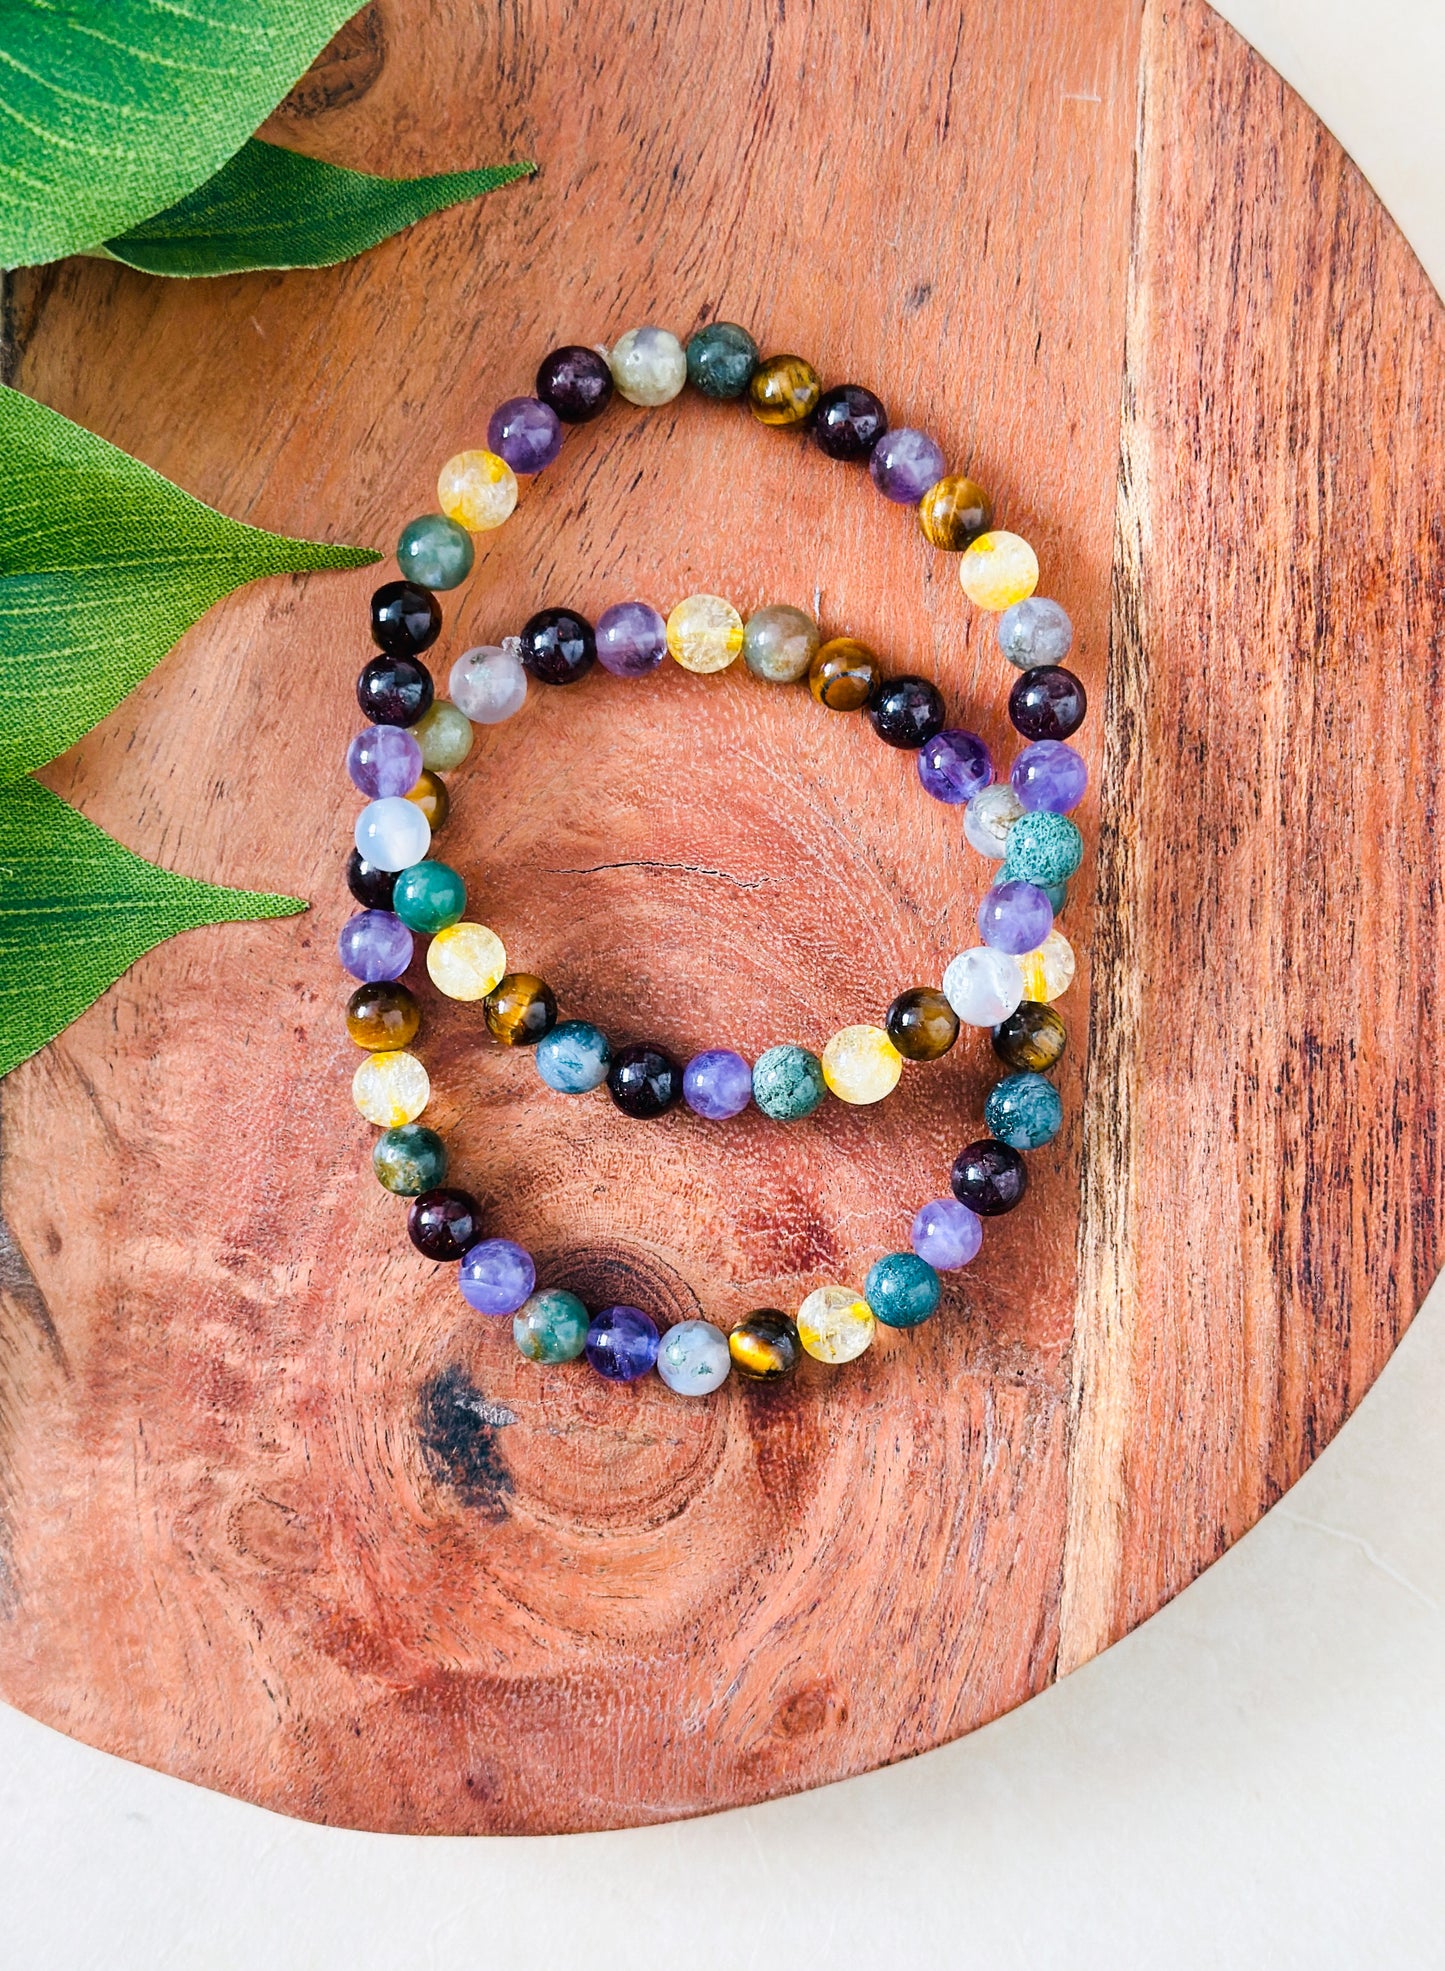 Introducing our exquisite gemstone bracelet, a harmonious blend of Moss Agate, Amethyst, Citrine, Tigers Eye, and Garnet. Crafted with precision and care, each stone contributes unique healing properties to create a holistic synergy.